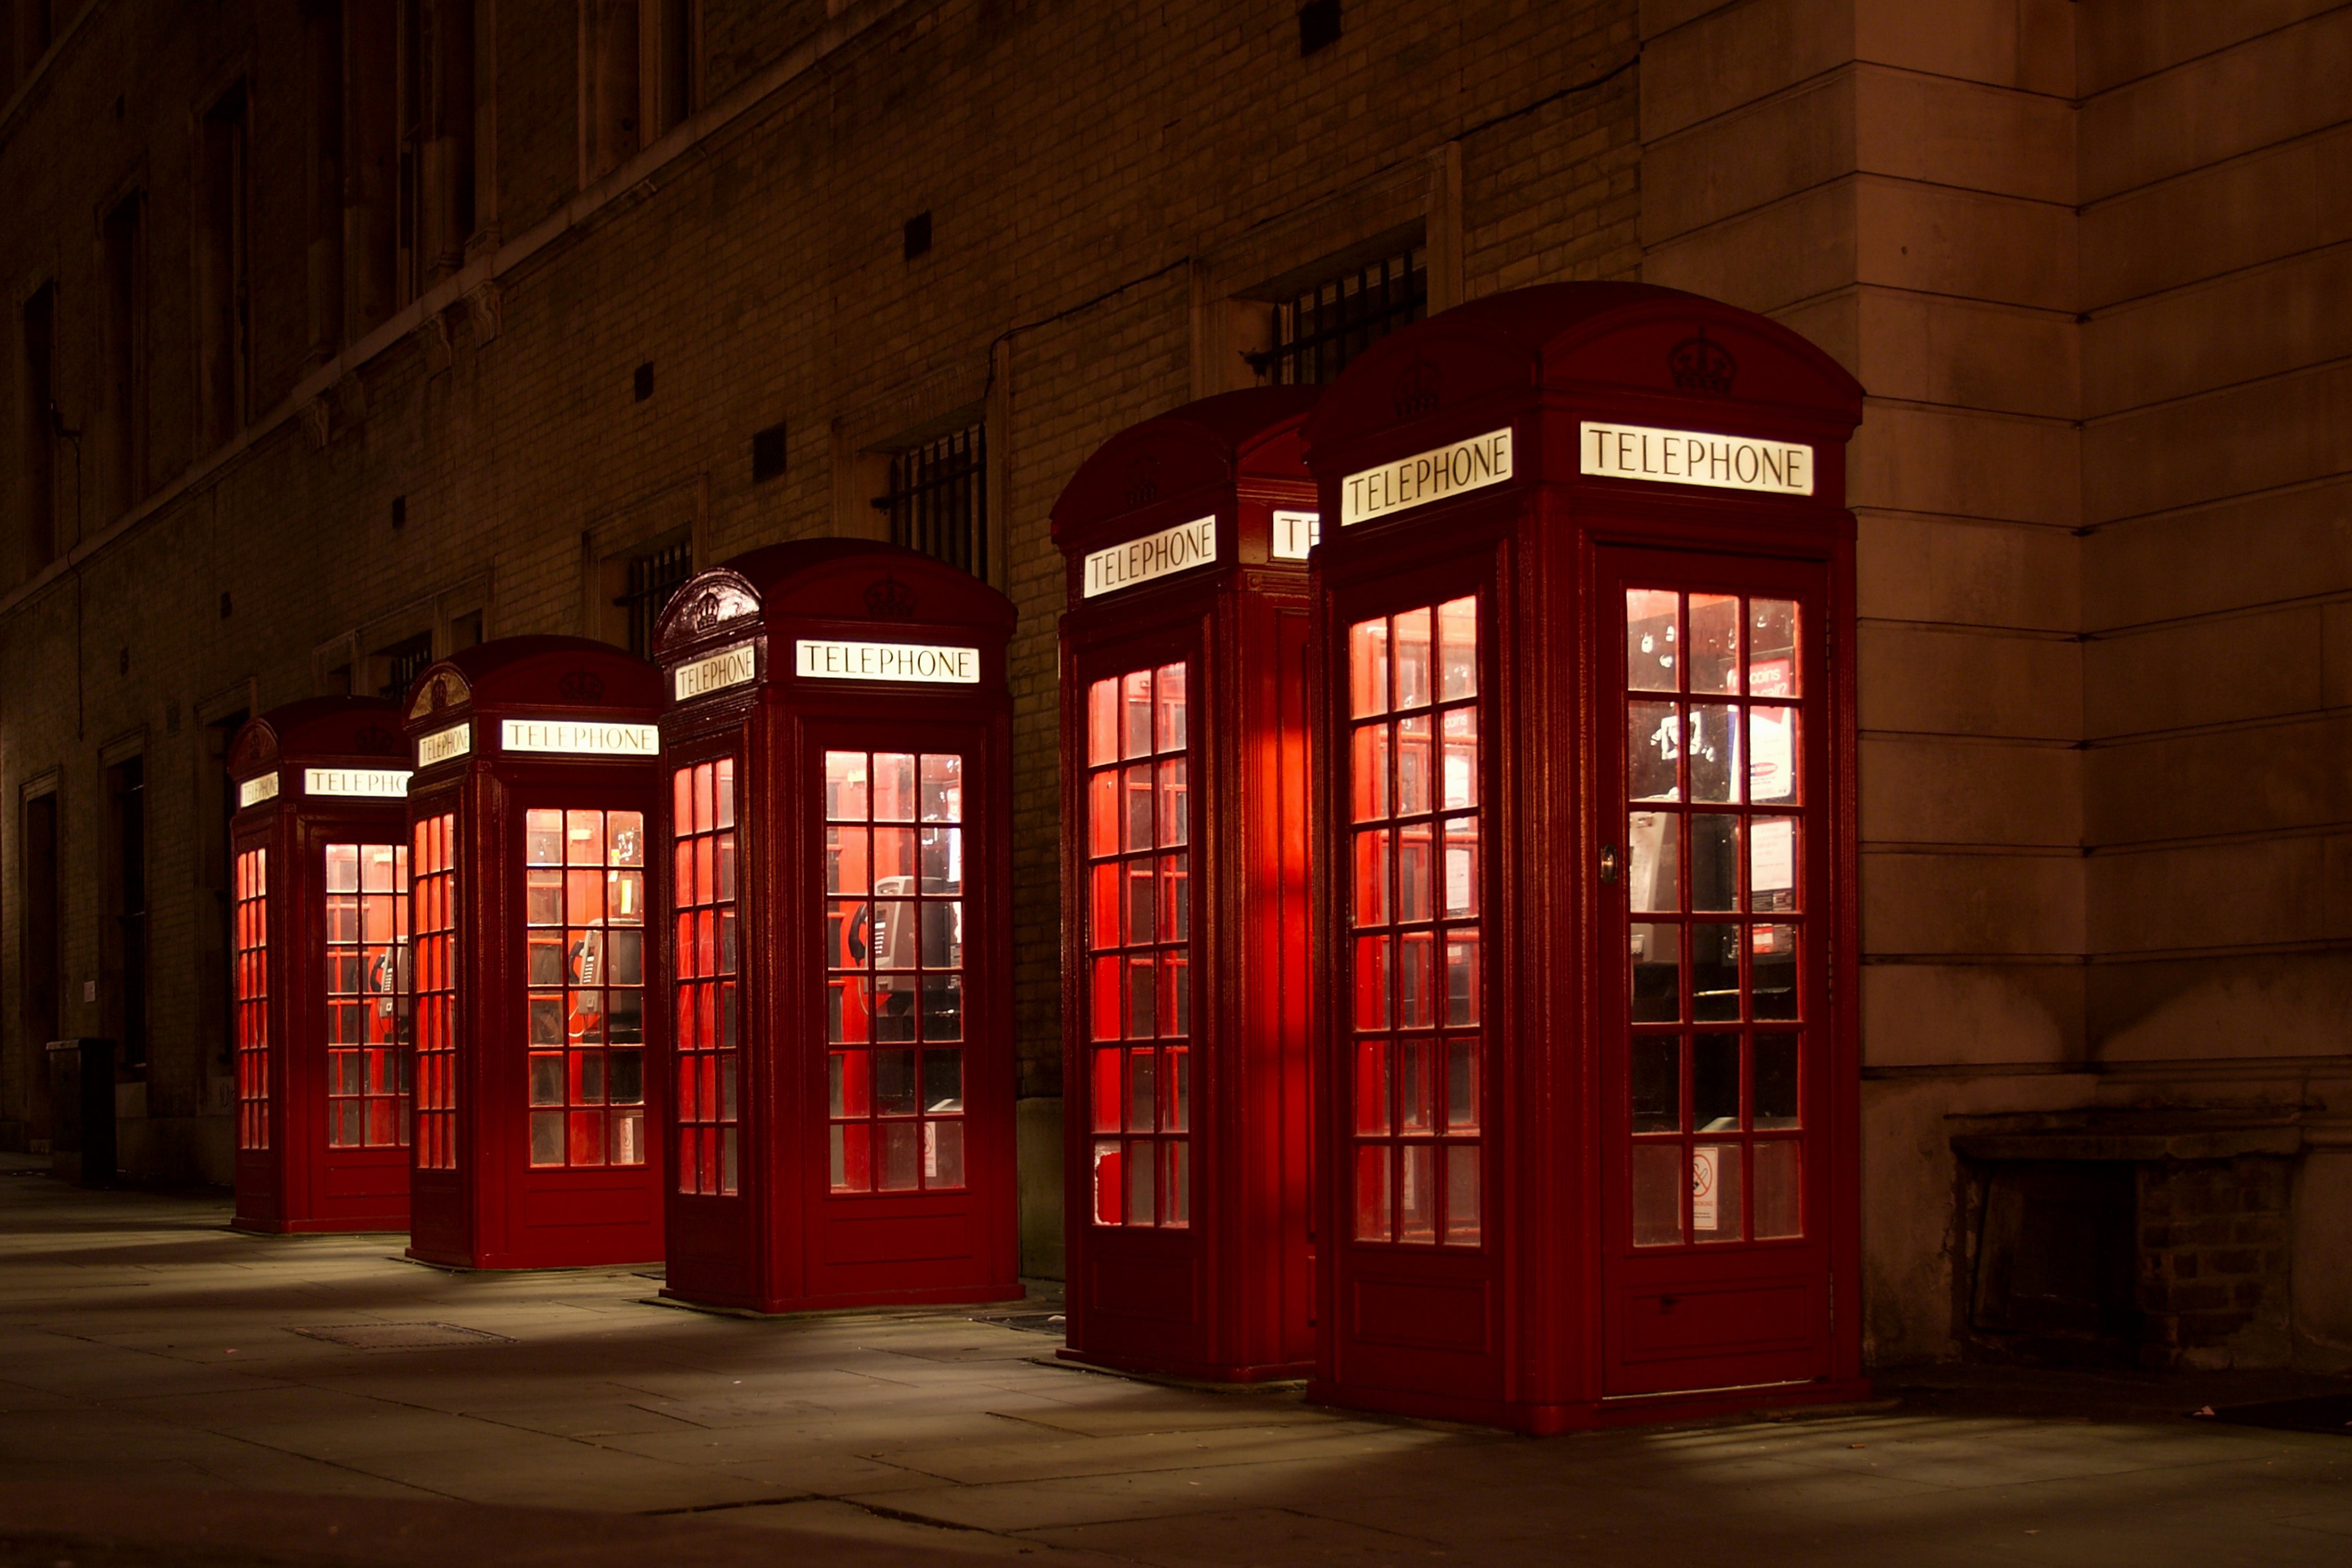 General 3542x2362 photography phone box red phone night city